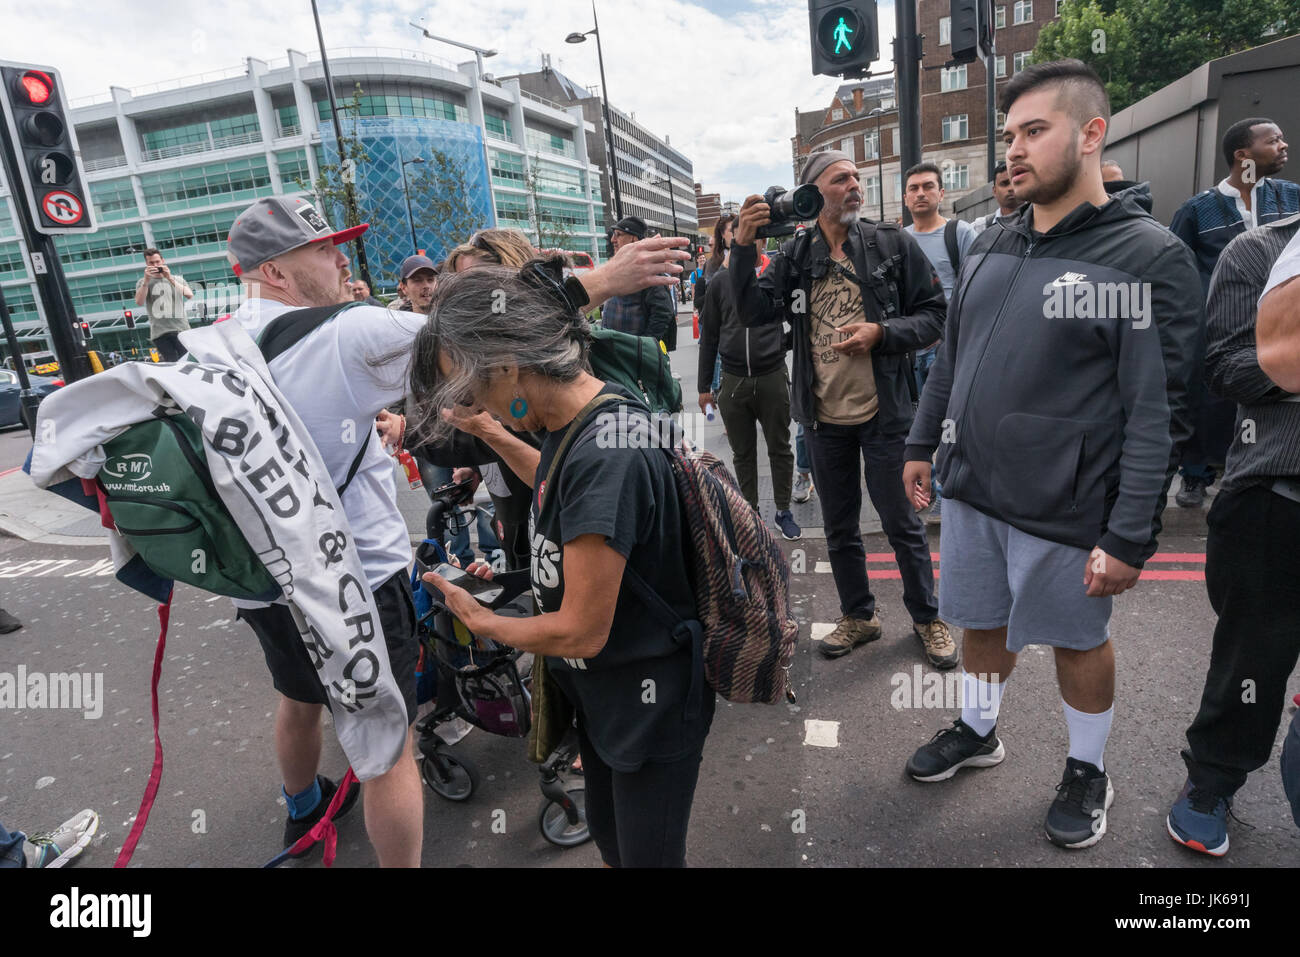 July 21, 2017 - London, UK - London, UK. 21st July 2017. A driver comes to argue with DPAC as they end their week of action during the London Para Athletics World Championships by blocking one carriageway of the Euston Road at Warren St for around ten minutes. They tell him that thousands of people are dyring and that everyone needs ot take action to stop it, even if it does hold up traffic for a few mintues. The two police officers present asked them to move and then radioed for reinforcements, who arrived just after the protesters left the road. DPAC say that the government uses support of t Stock Photo